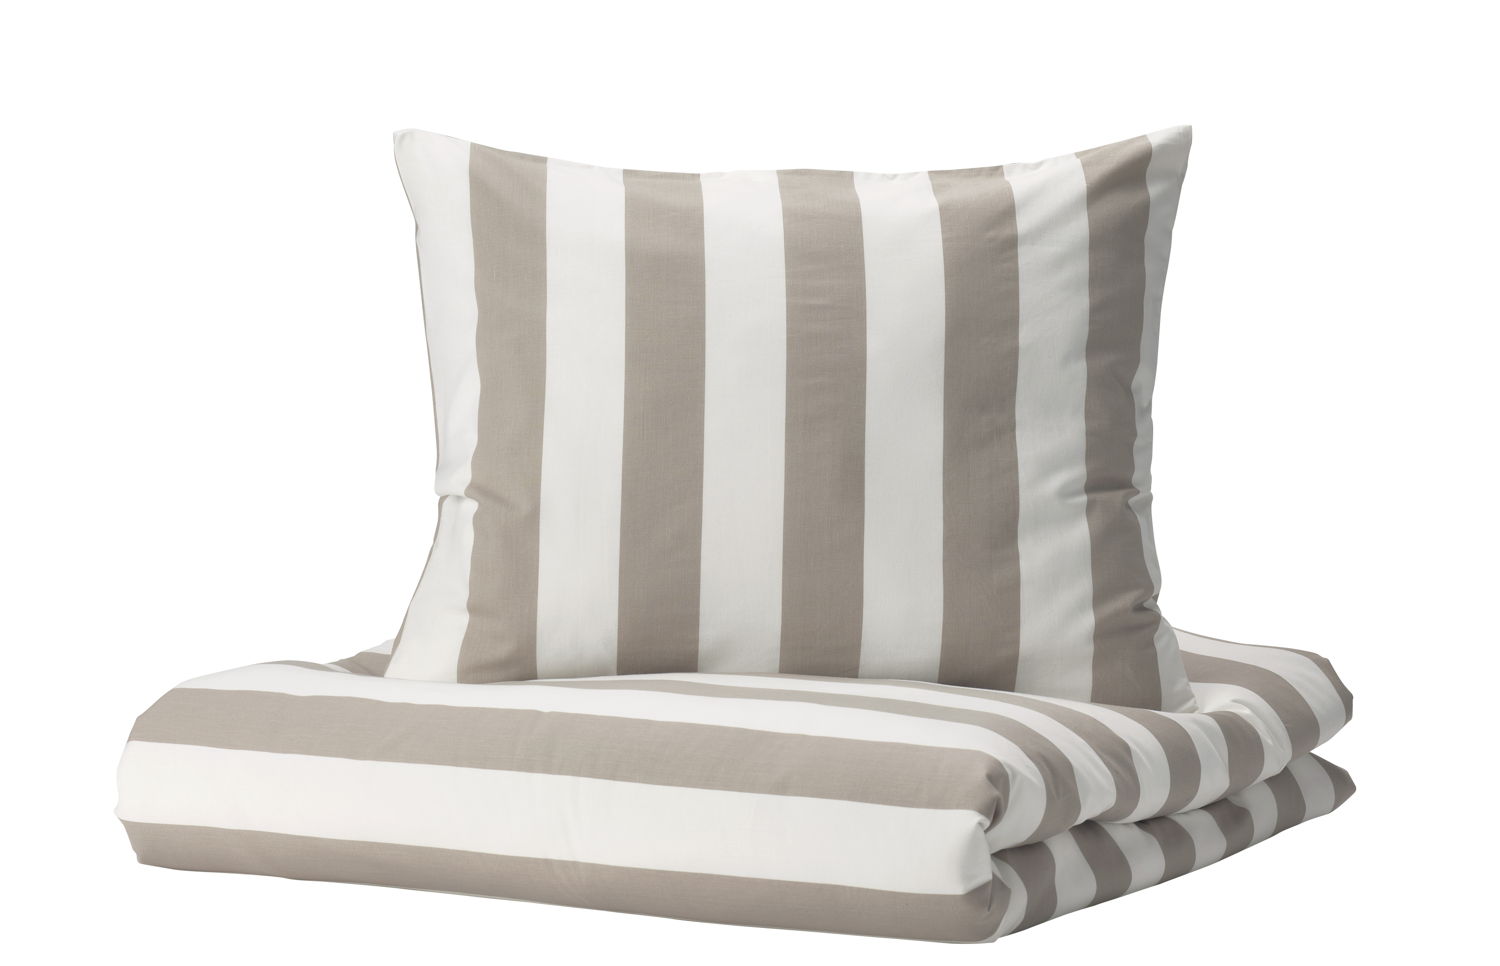 IKEA_April News FY21_BÄRALM quilt cover and pillowcase_€14,99